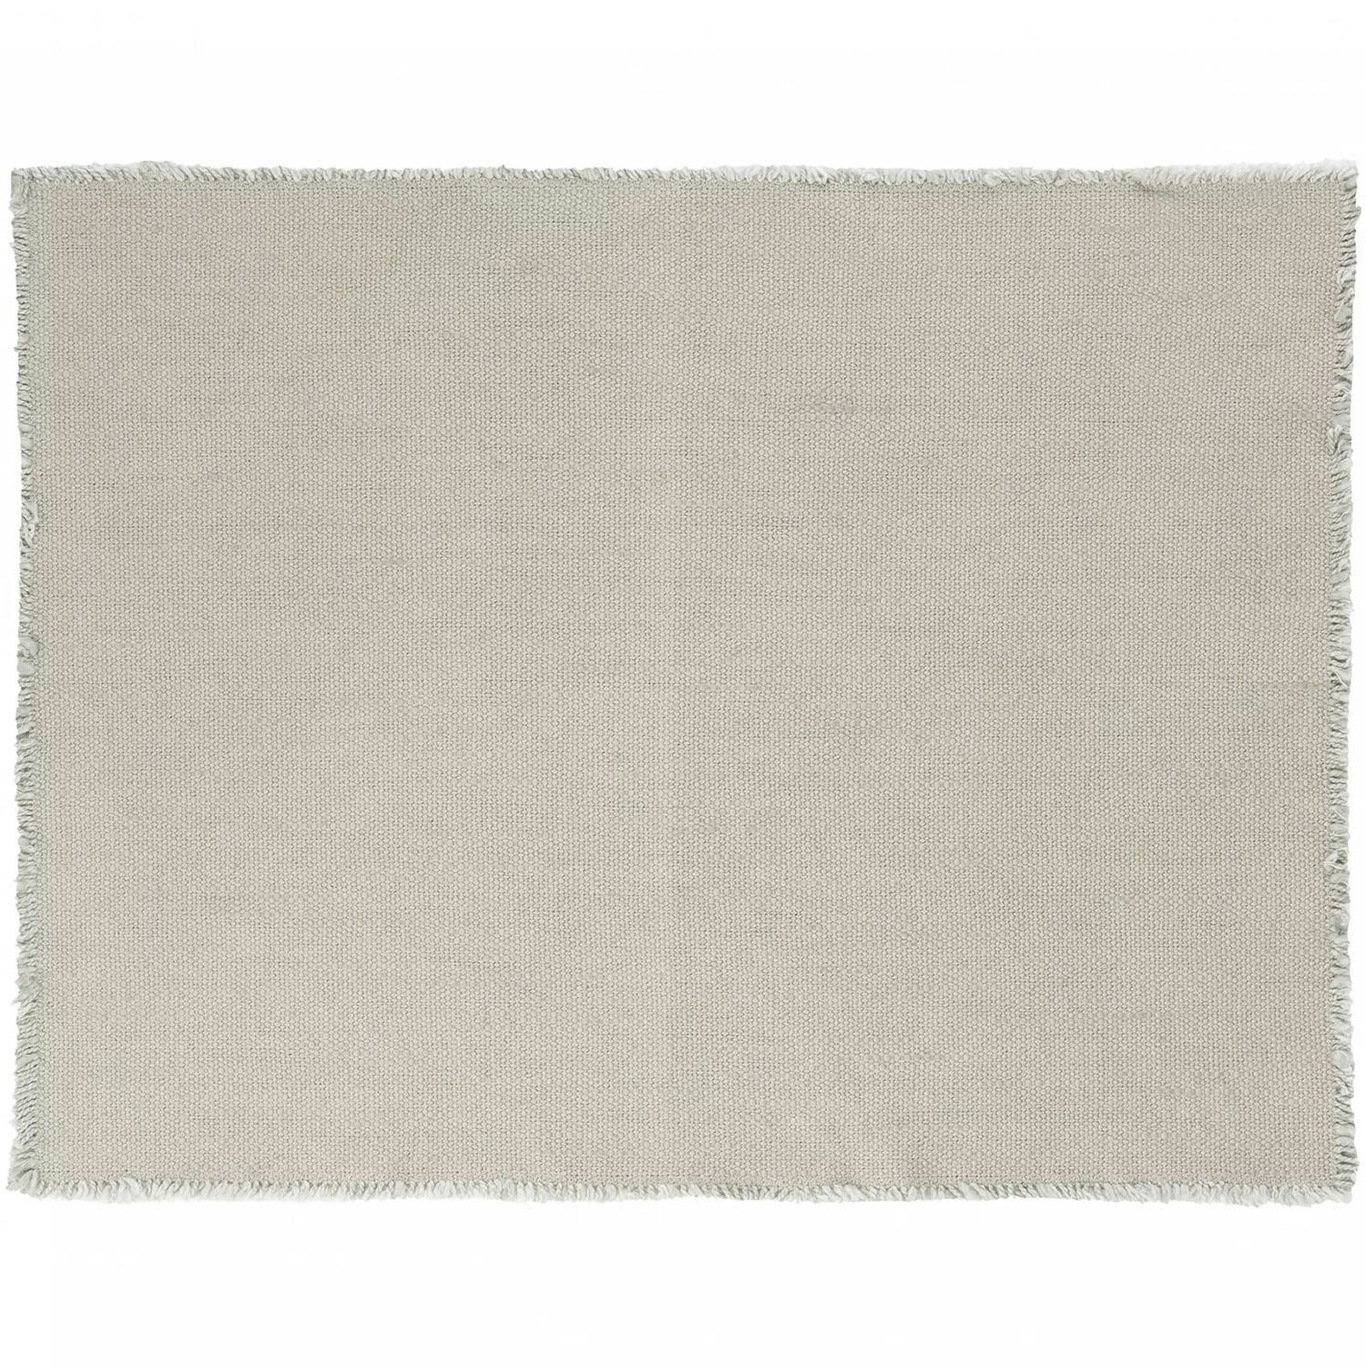 LINEO Placemat 35x45 cm, Mirage Gray